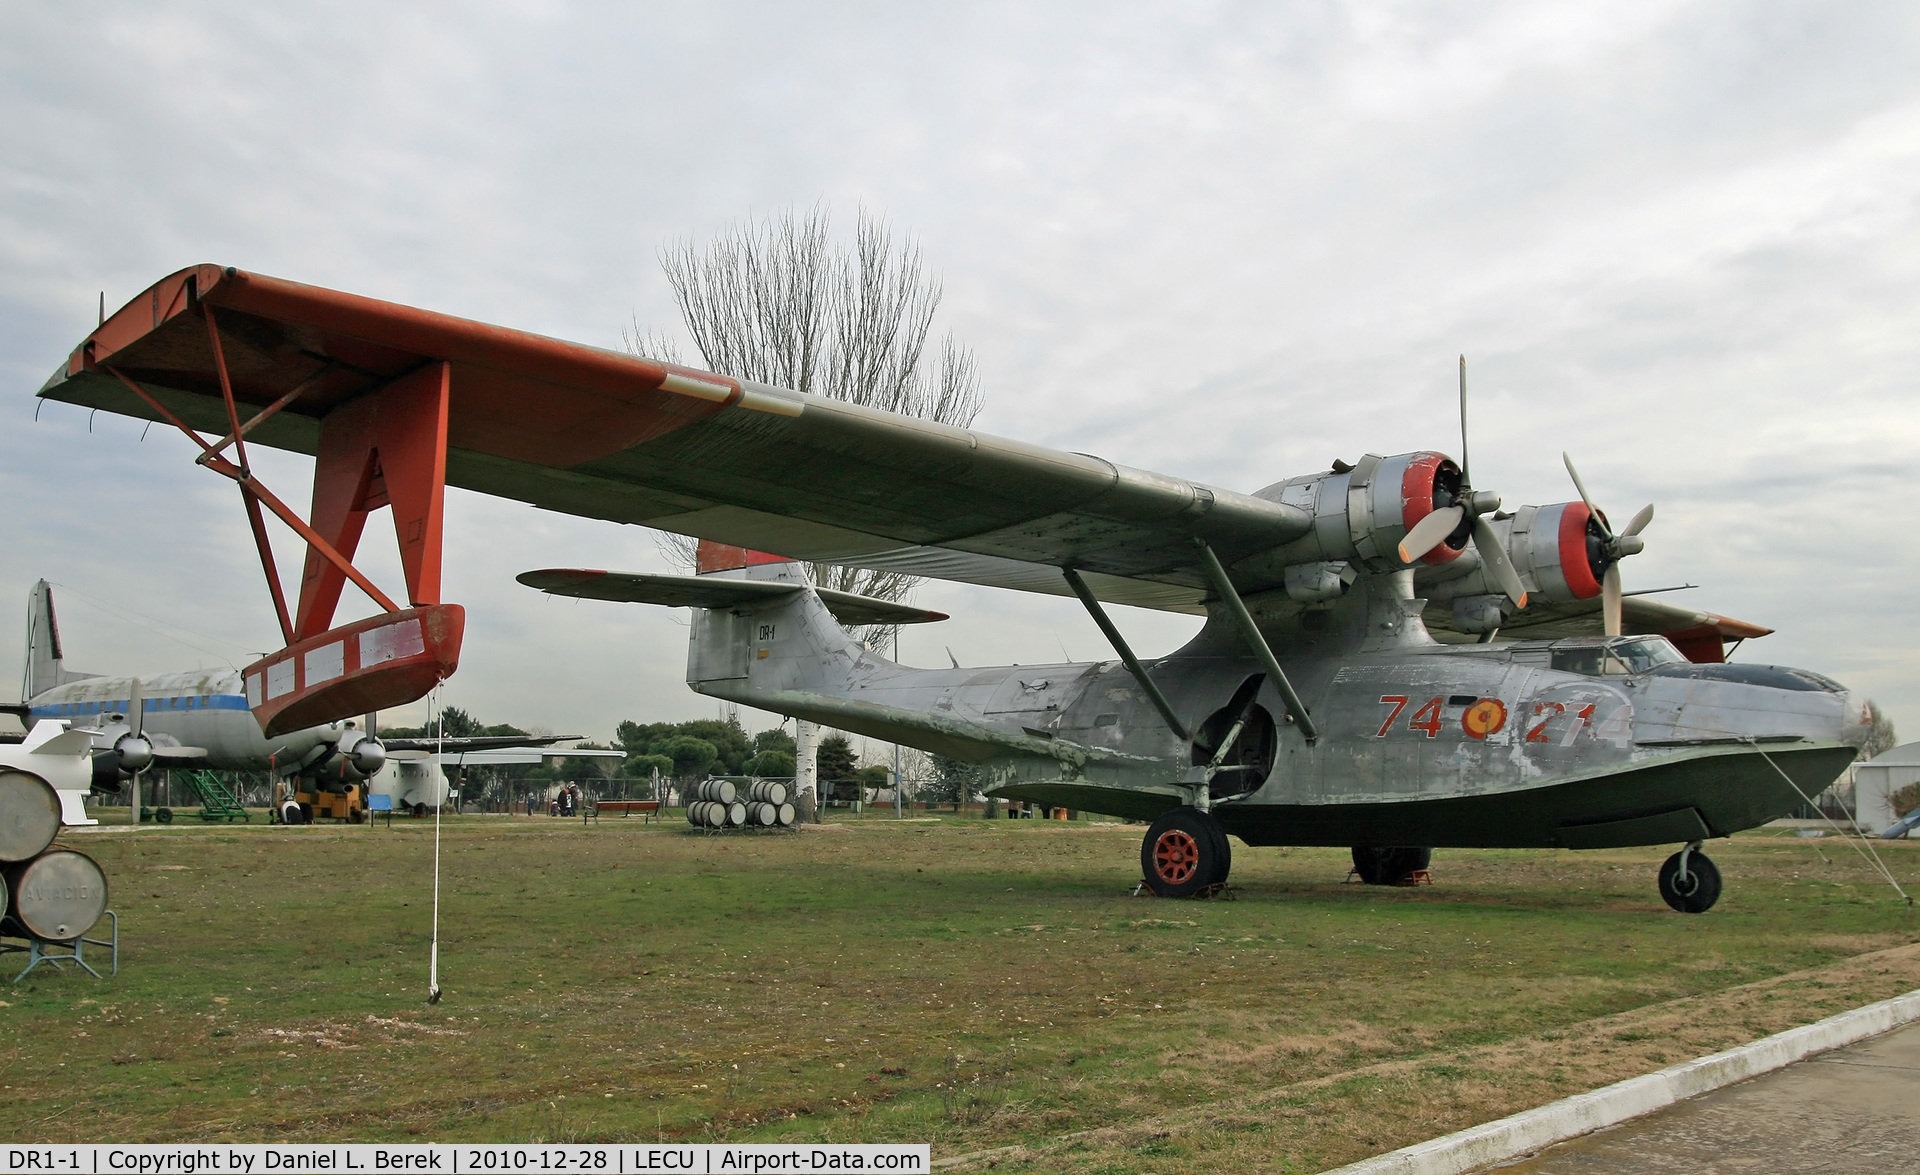 DR1-1, Consolidated PBY-5 Catalina C/N 1960, The Spanish Air Force ID is fake; this aircraft flew as EC-693 with SAESA.